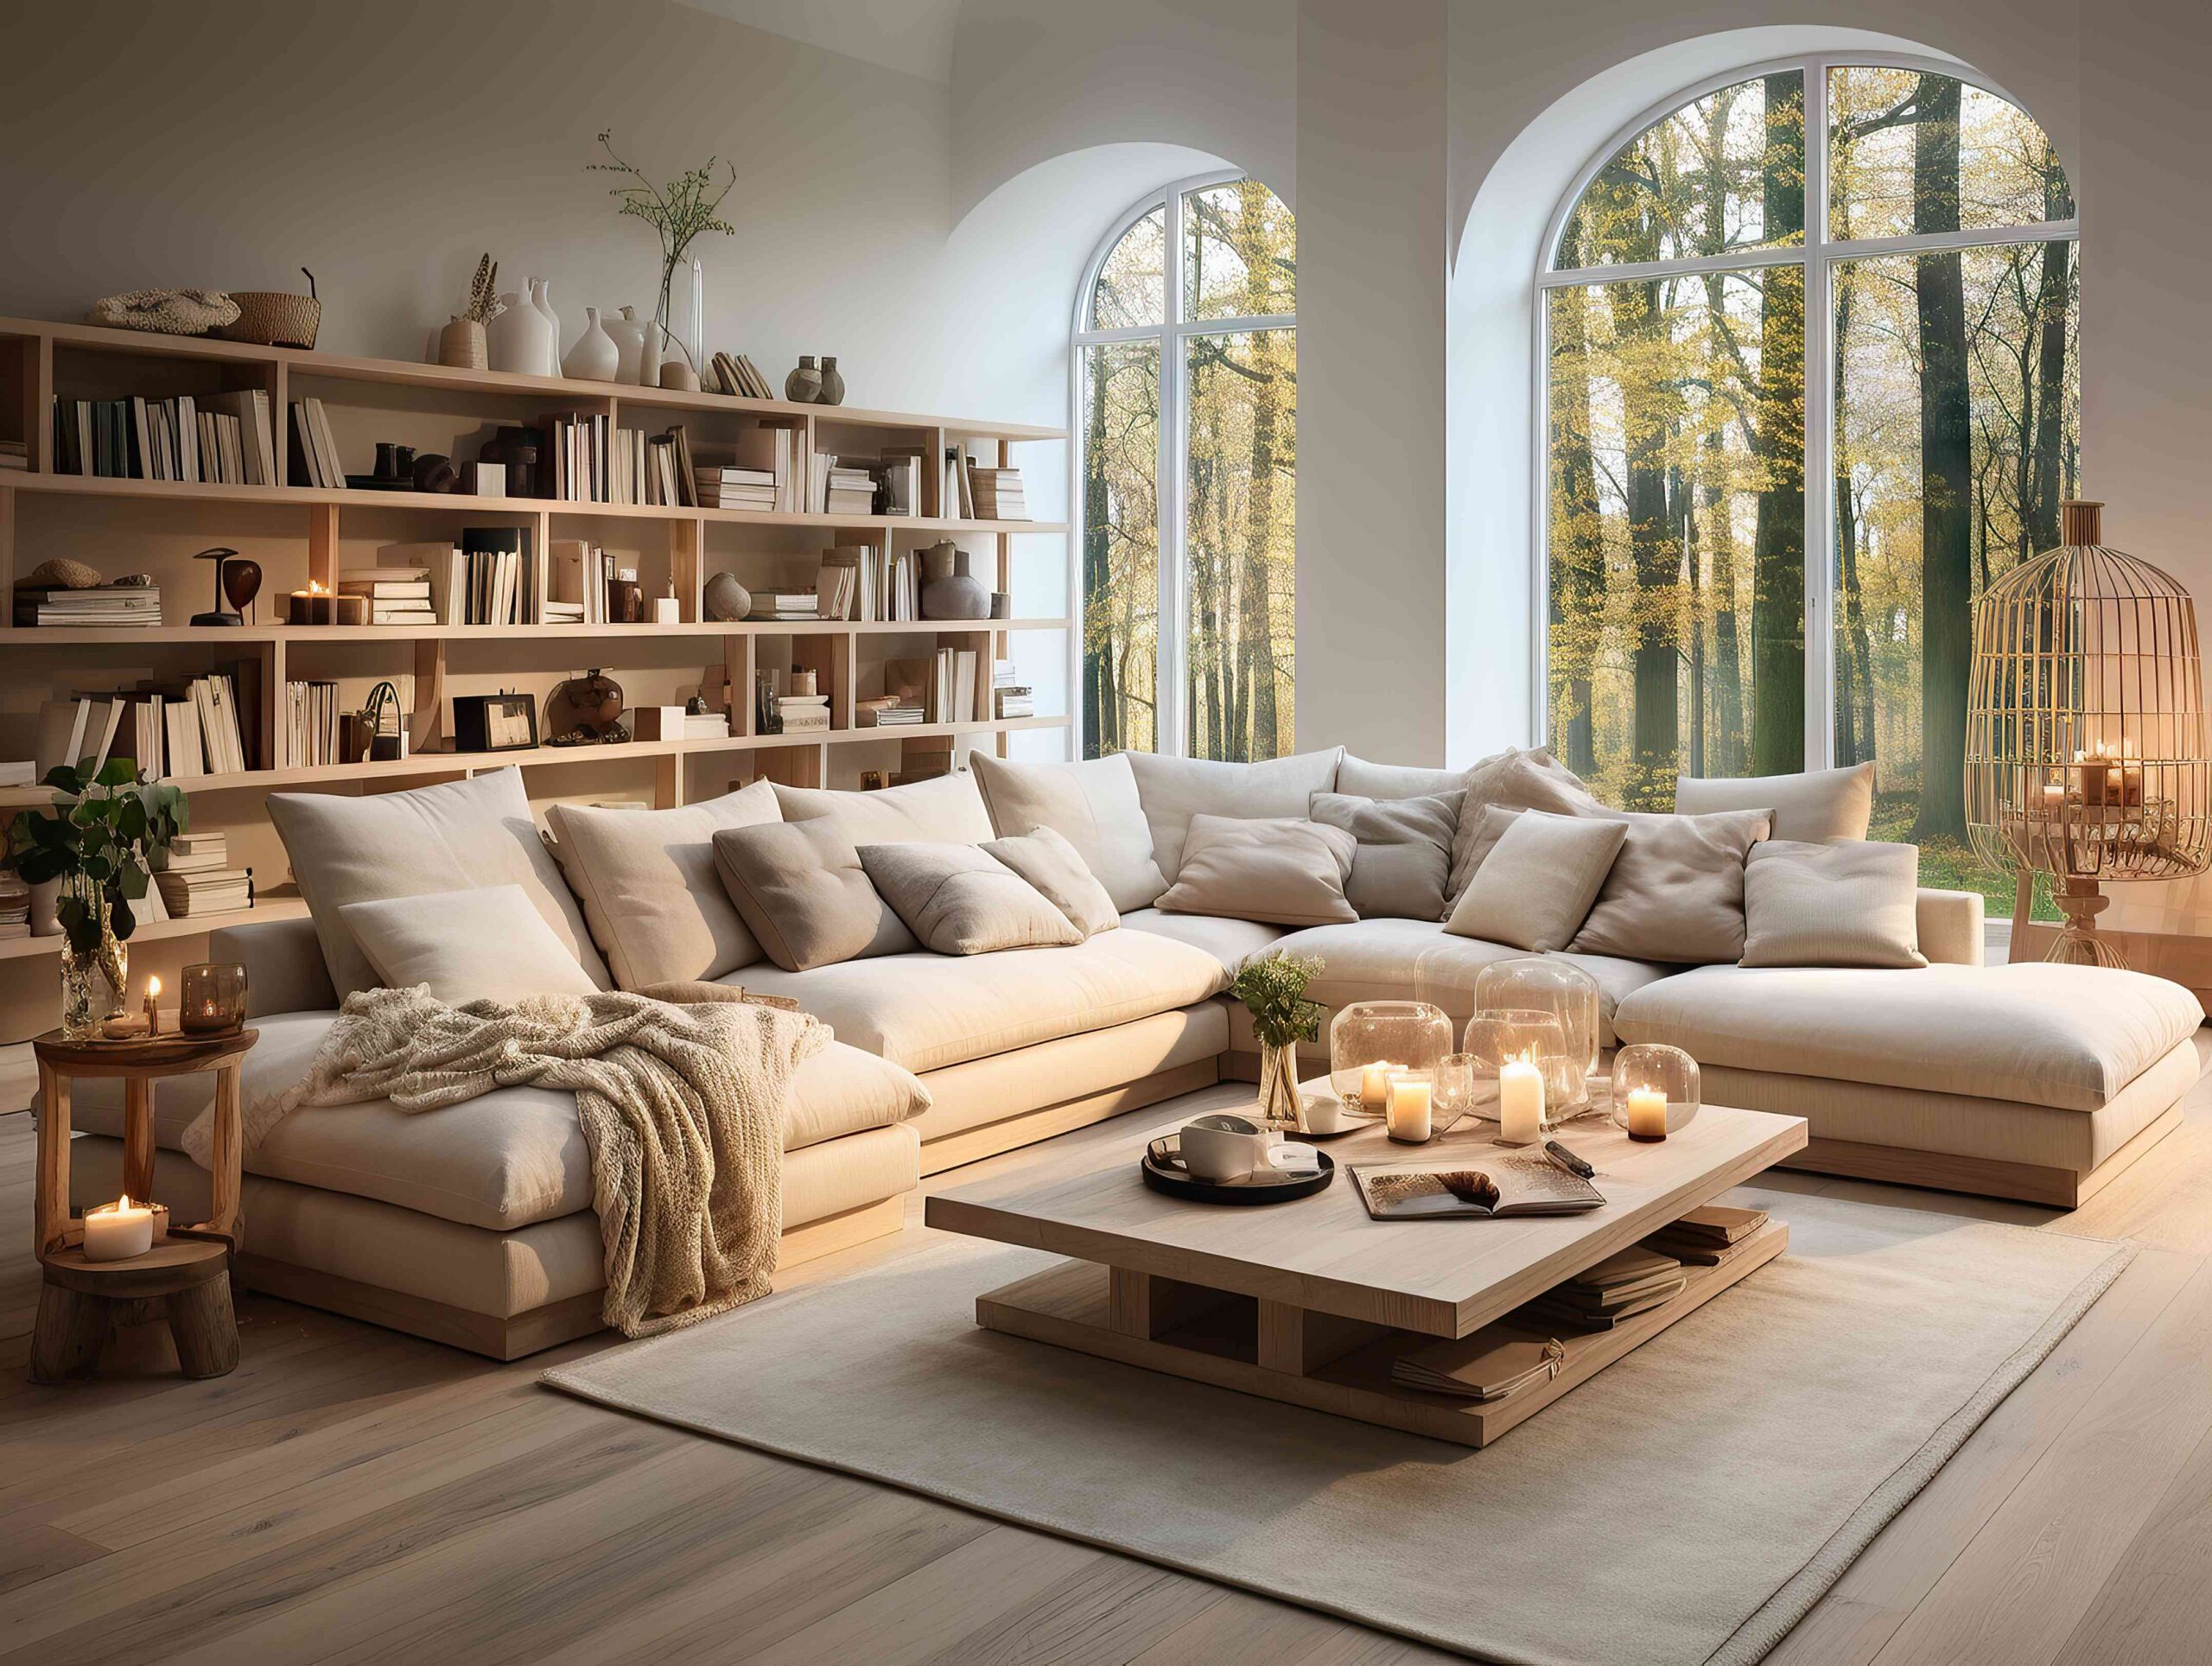 Italian Home Furniture: Experience the Essence of Italian Design in Your Living Space